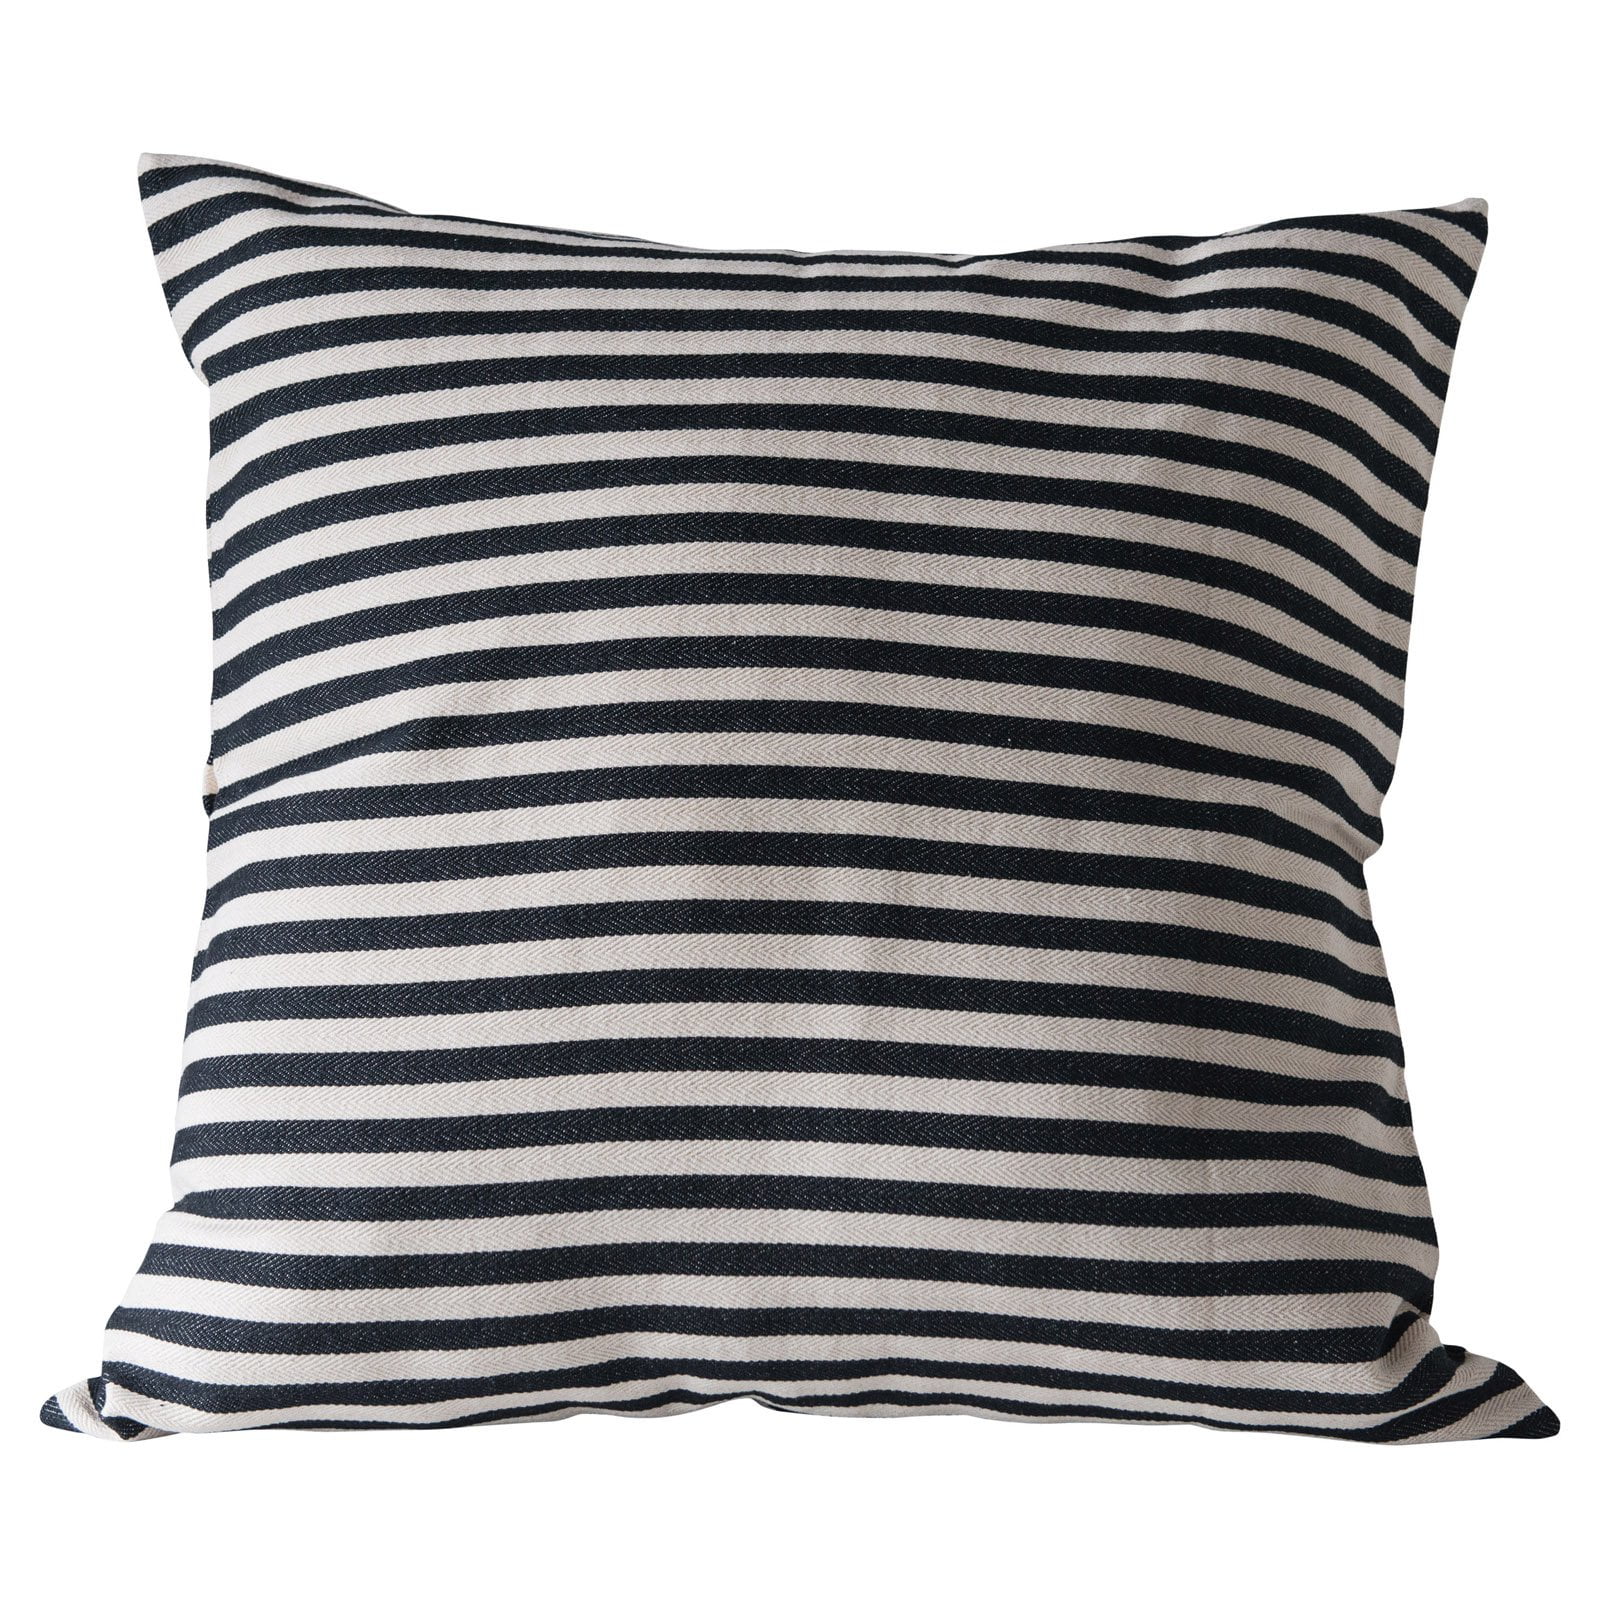 Photo 1 of 3R Studios Square Cotton Woven Pillow with Black and Cream Stripes